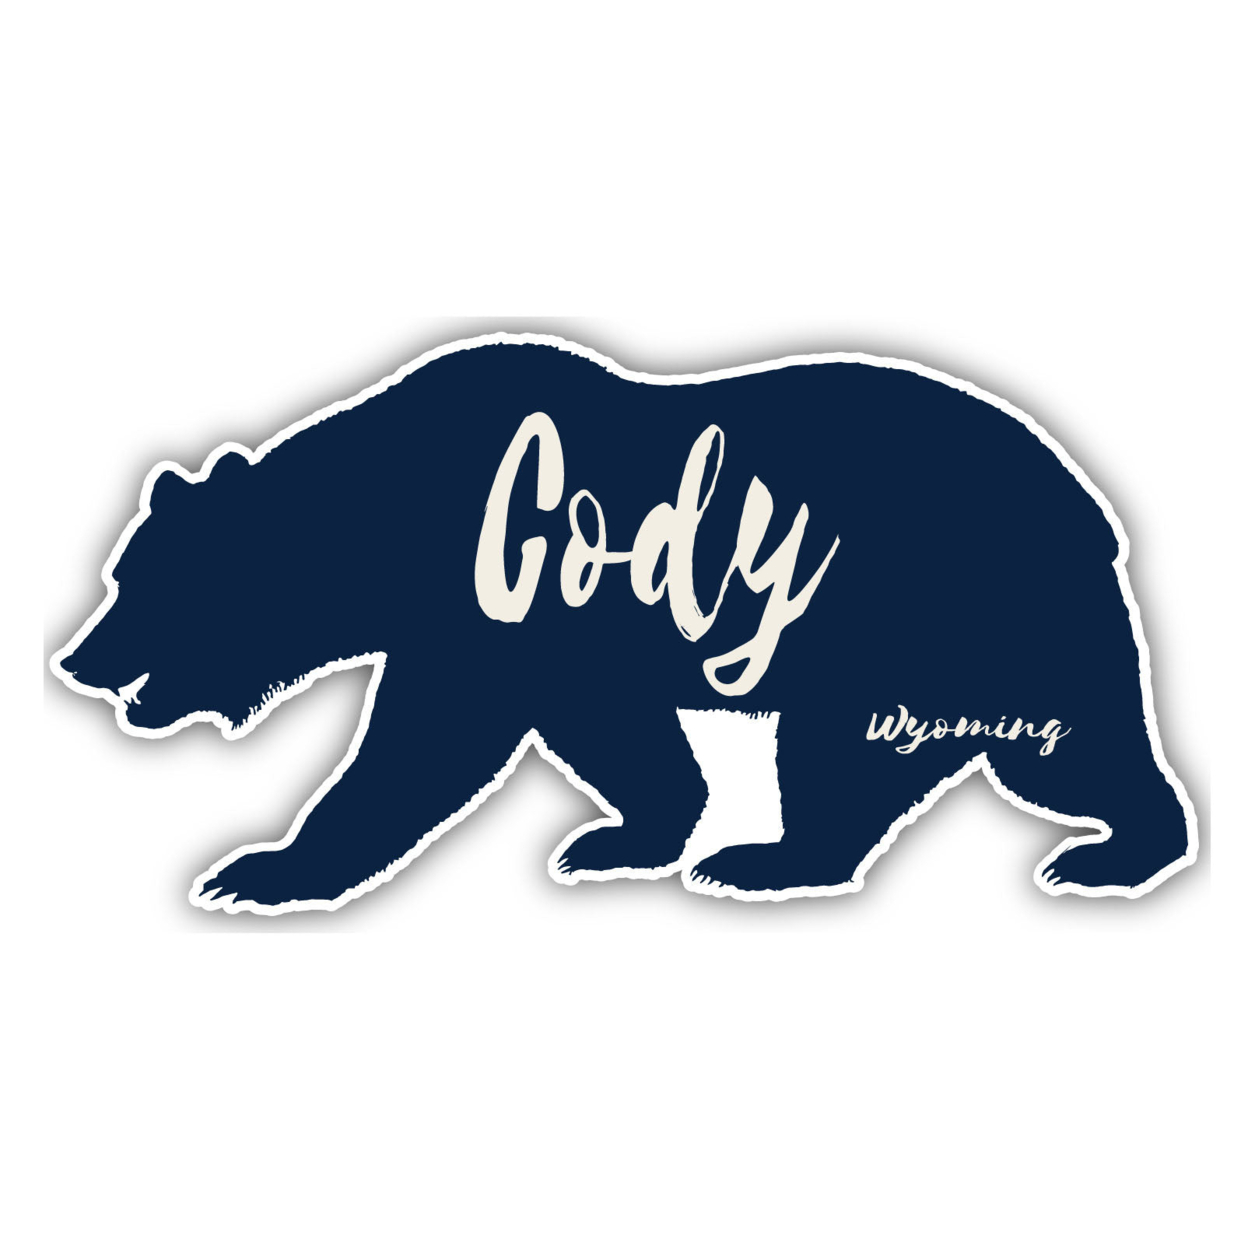 Cody Wyoming Souvenir Decorative Stickers (Choose Theme And Size) - Single Unit, 10-Inch, Bear